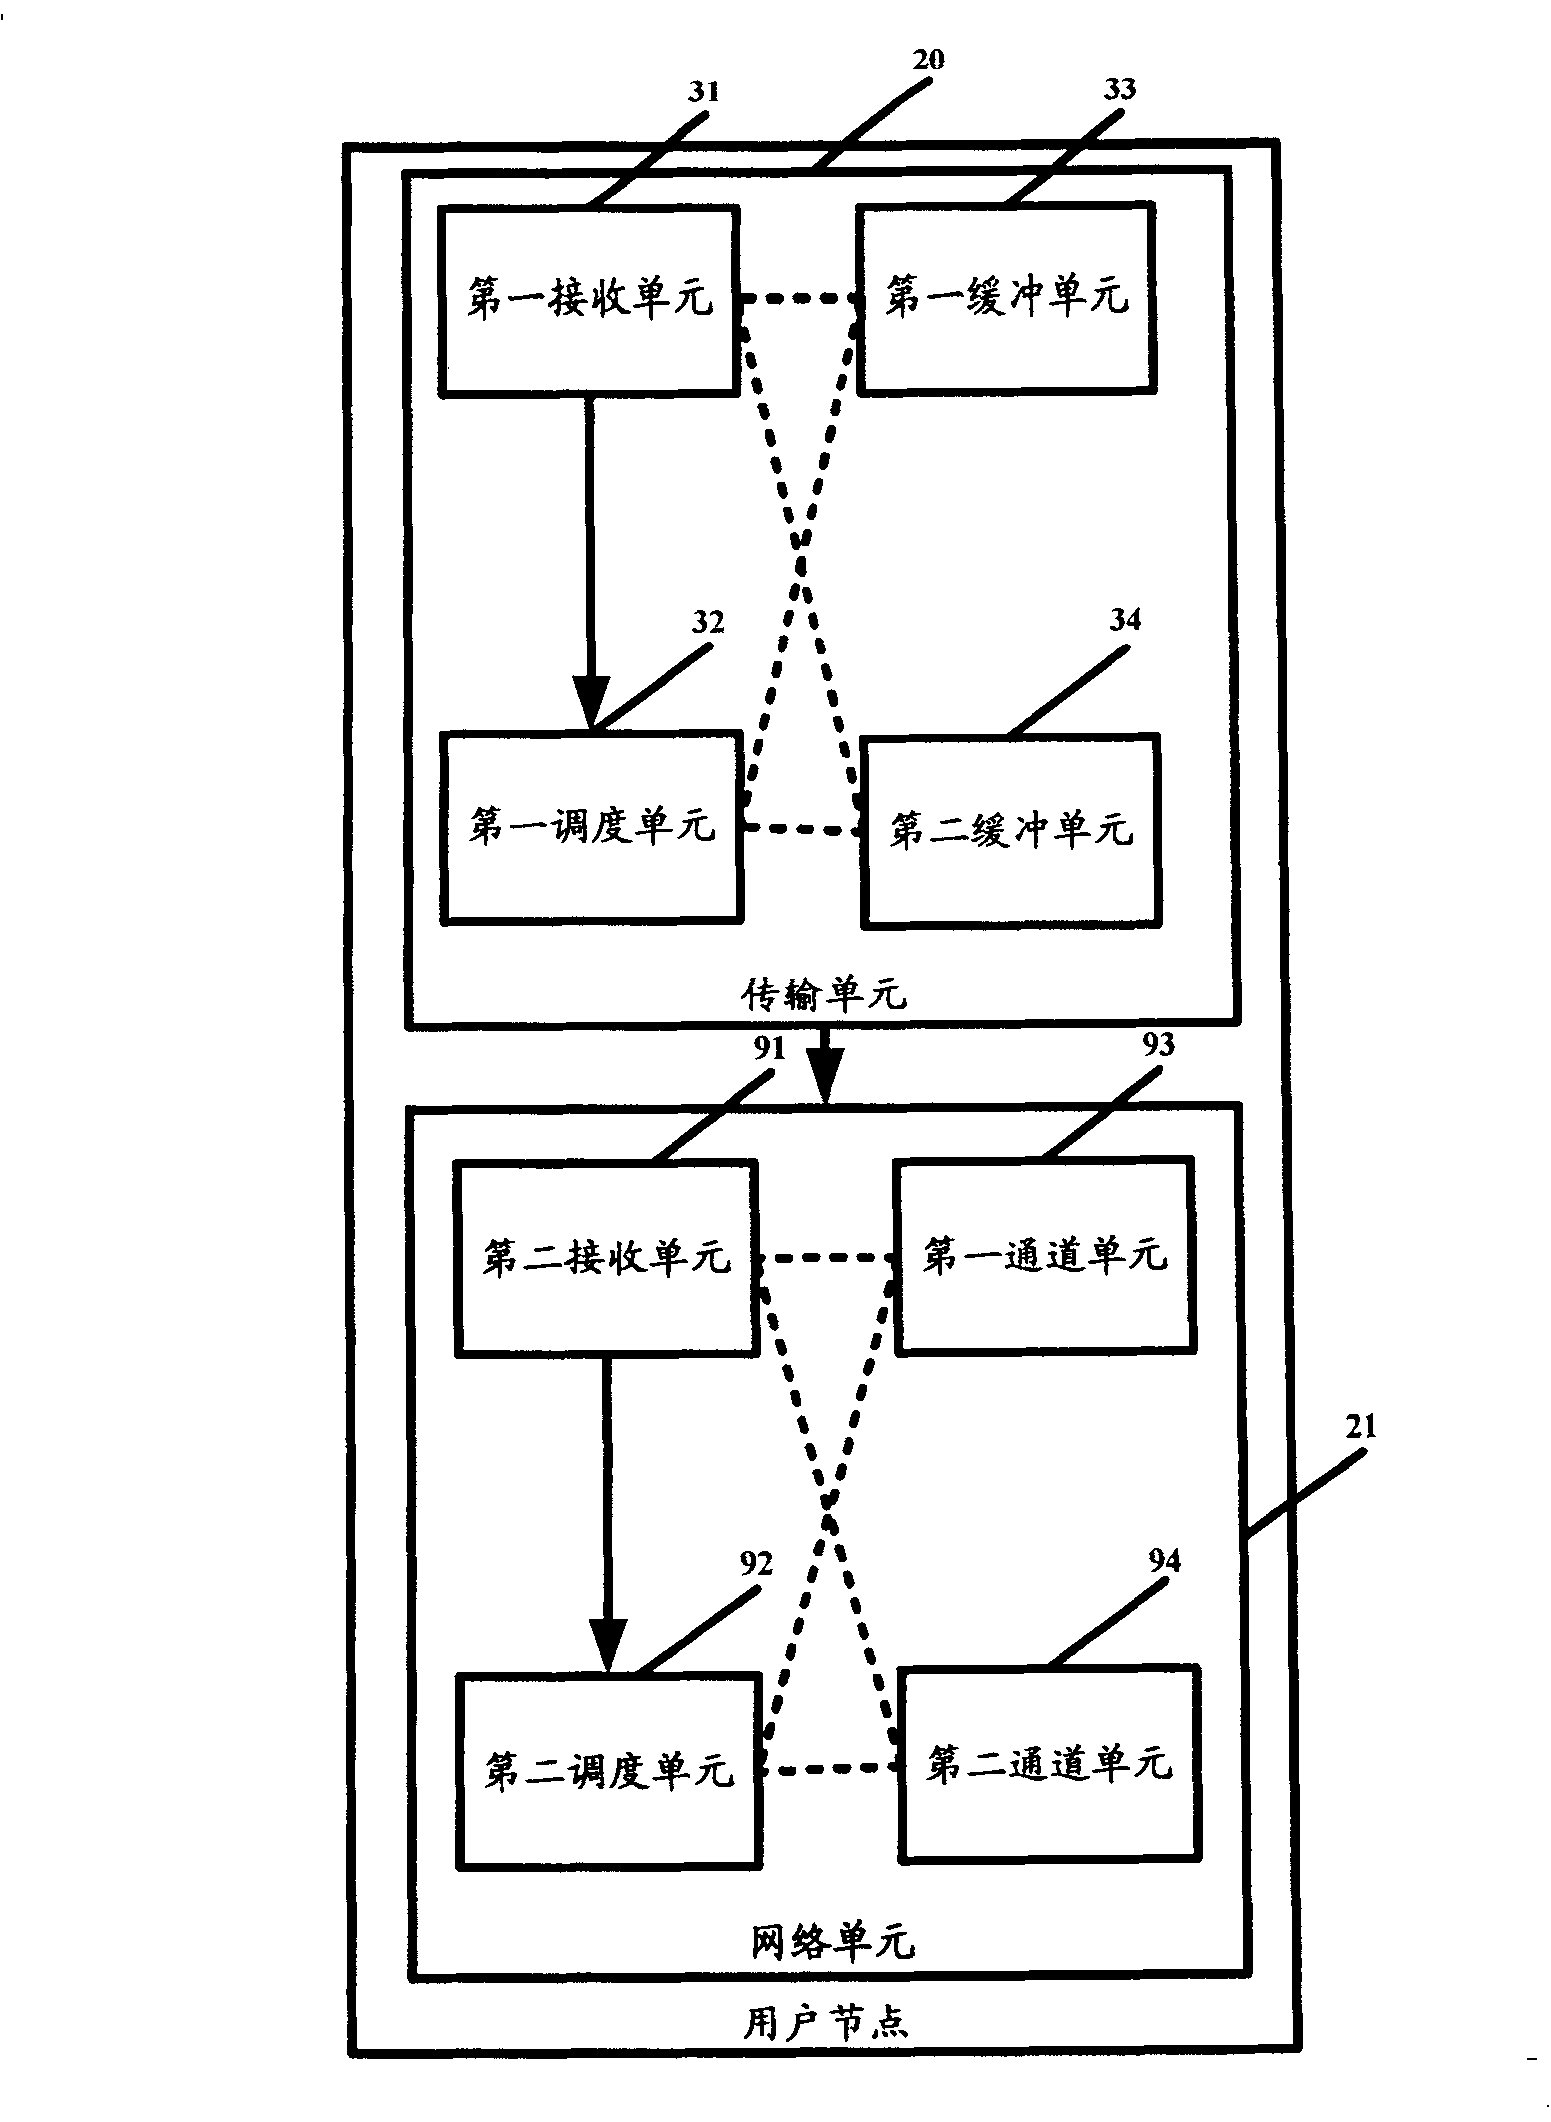 Method, system and device for service data transmission in P2P network